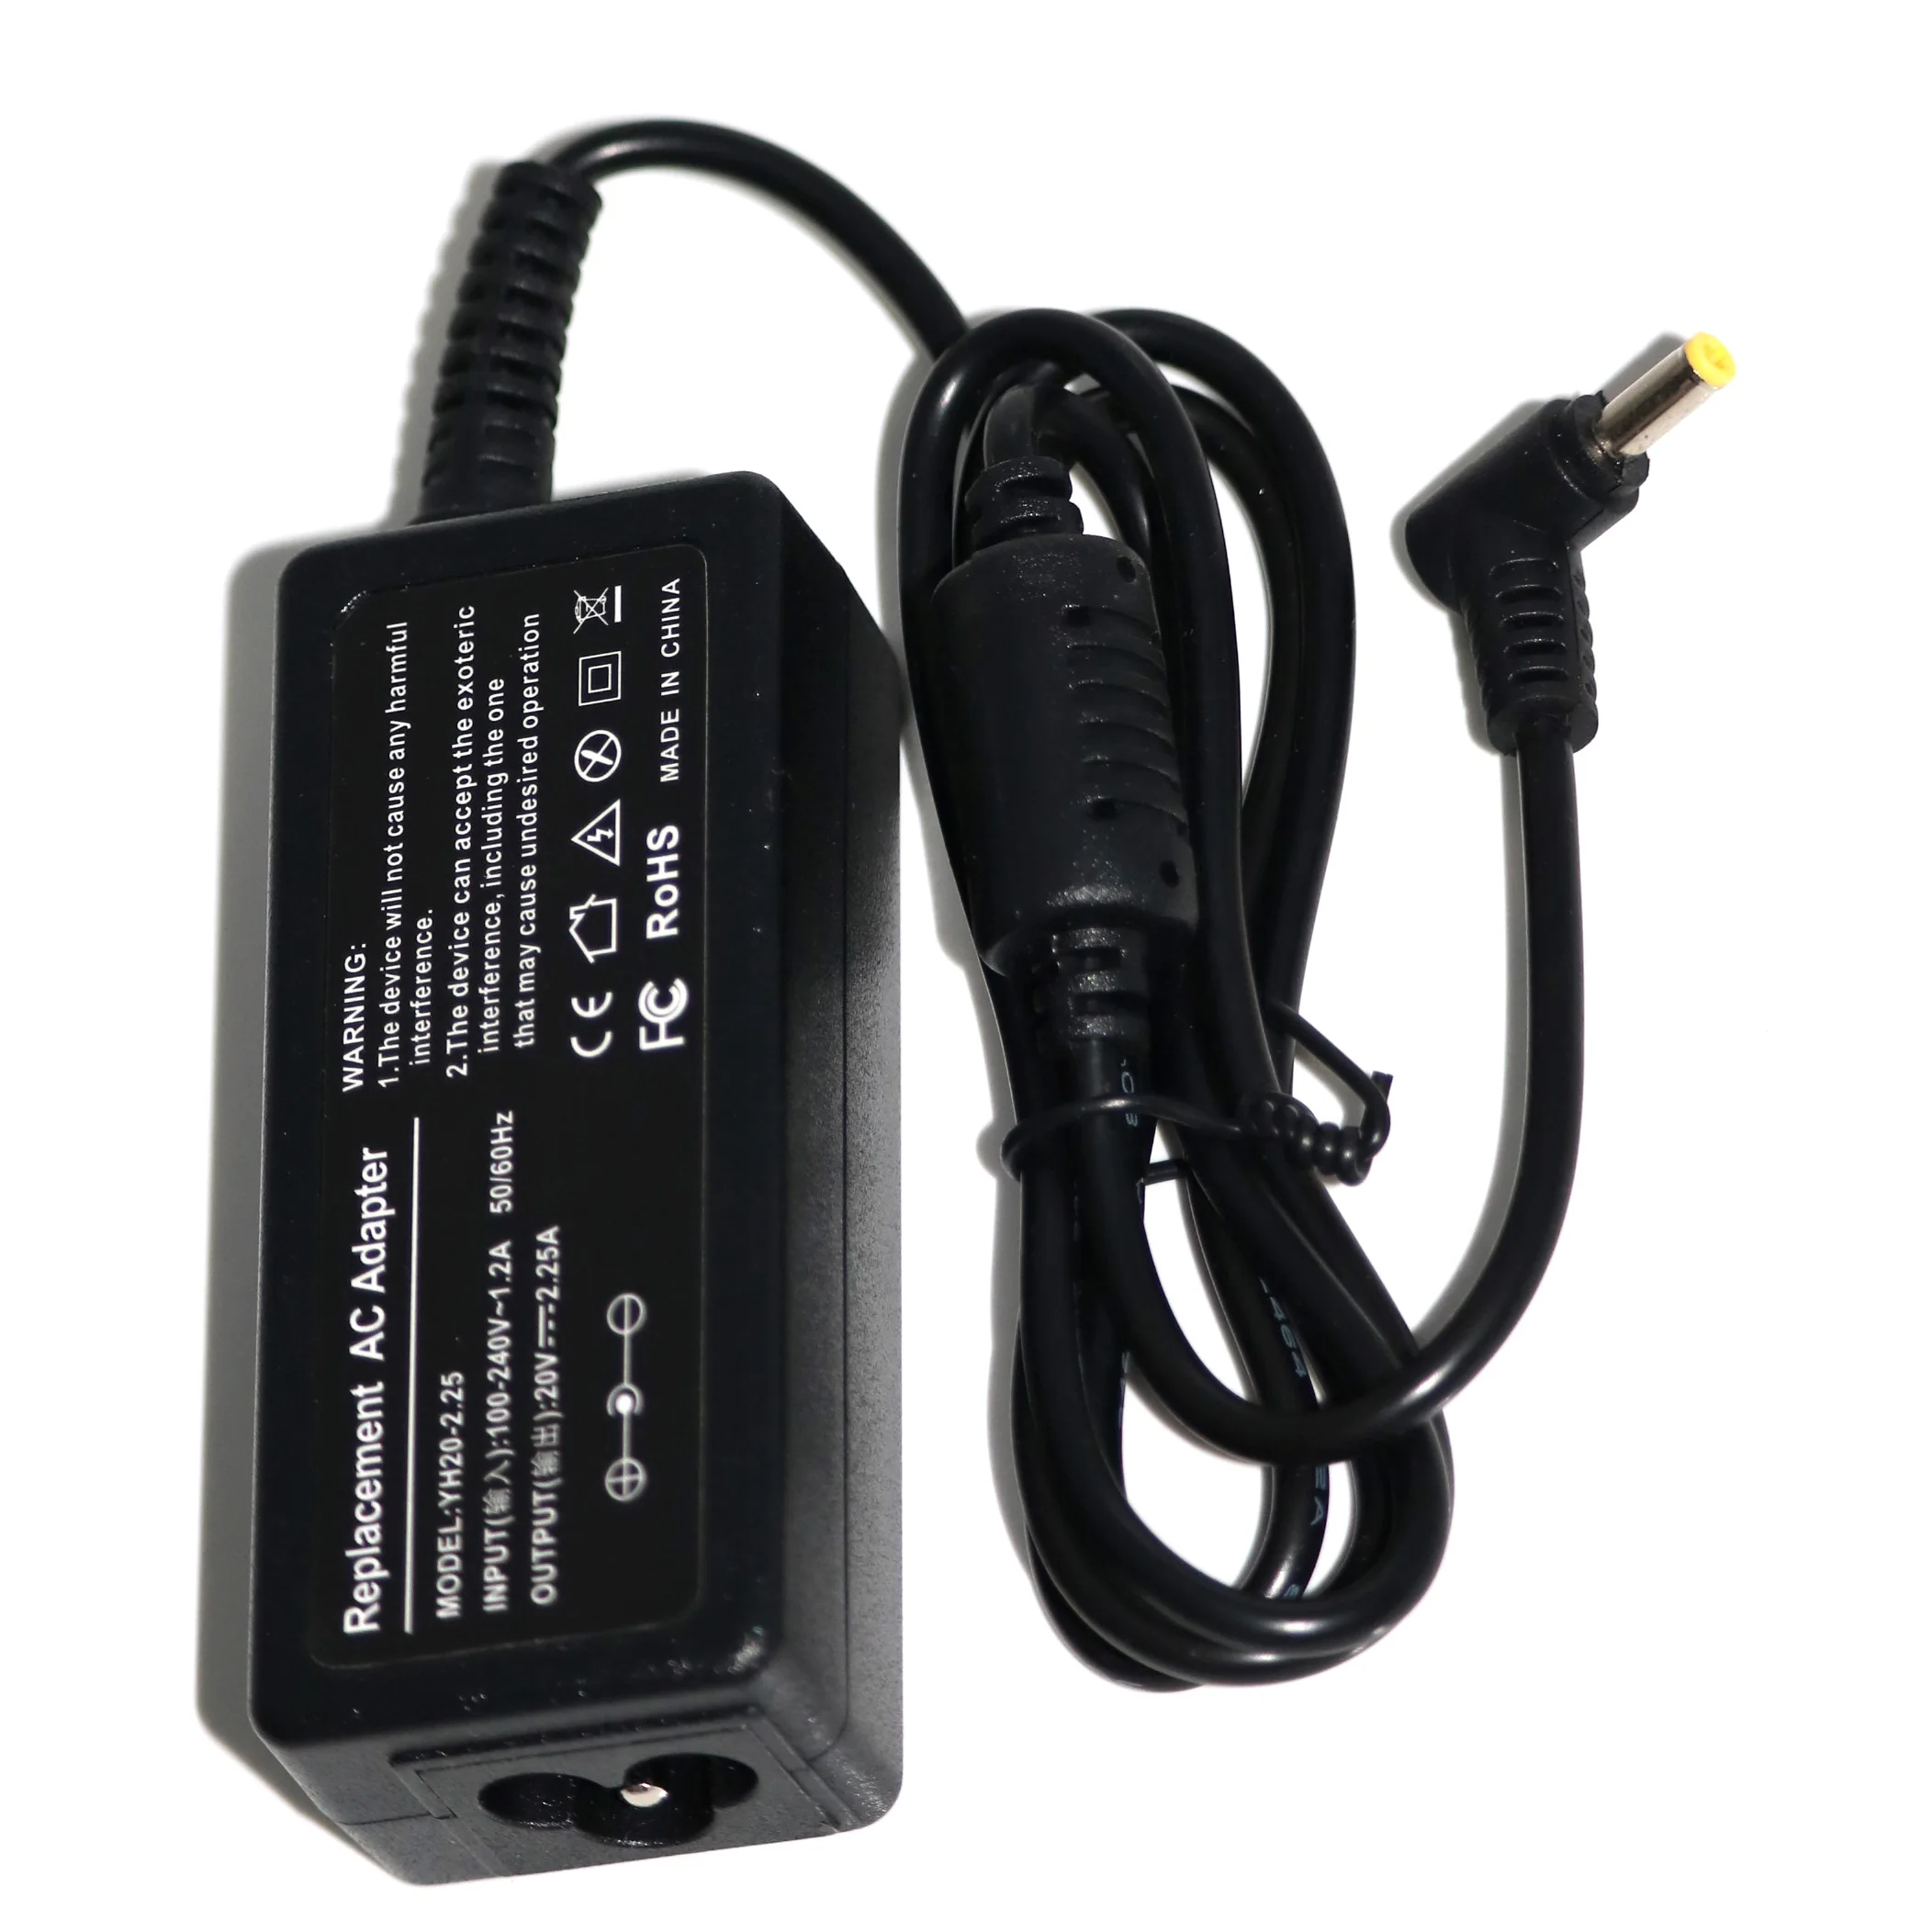 20V 2.25A 45W 4.0*1.7mm Laptop Power Adapter for Lenovo charger Ideapad 100 100s yoga310 yoga510 AC Adapter Charger ADL45WCC wireless speakers for laptop